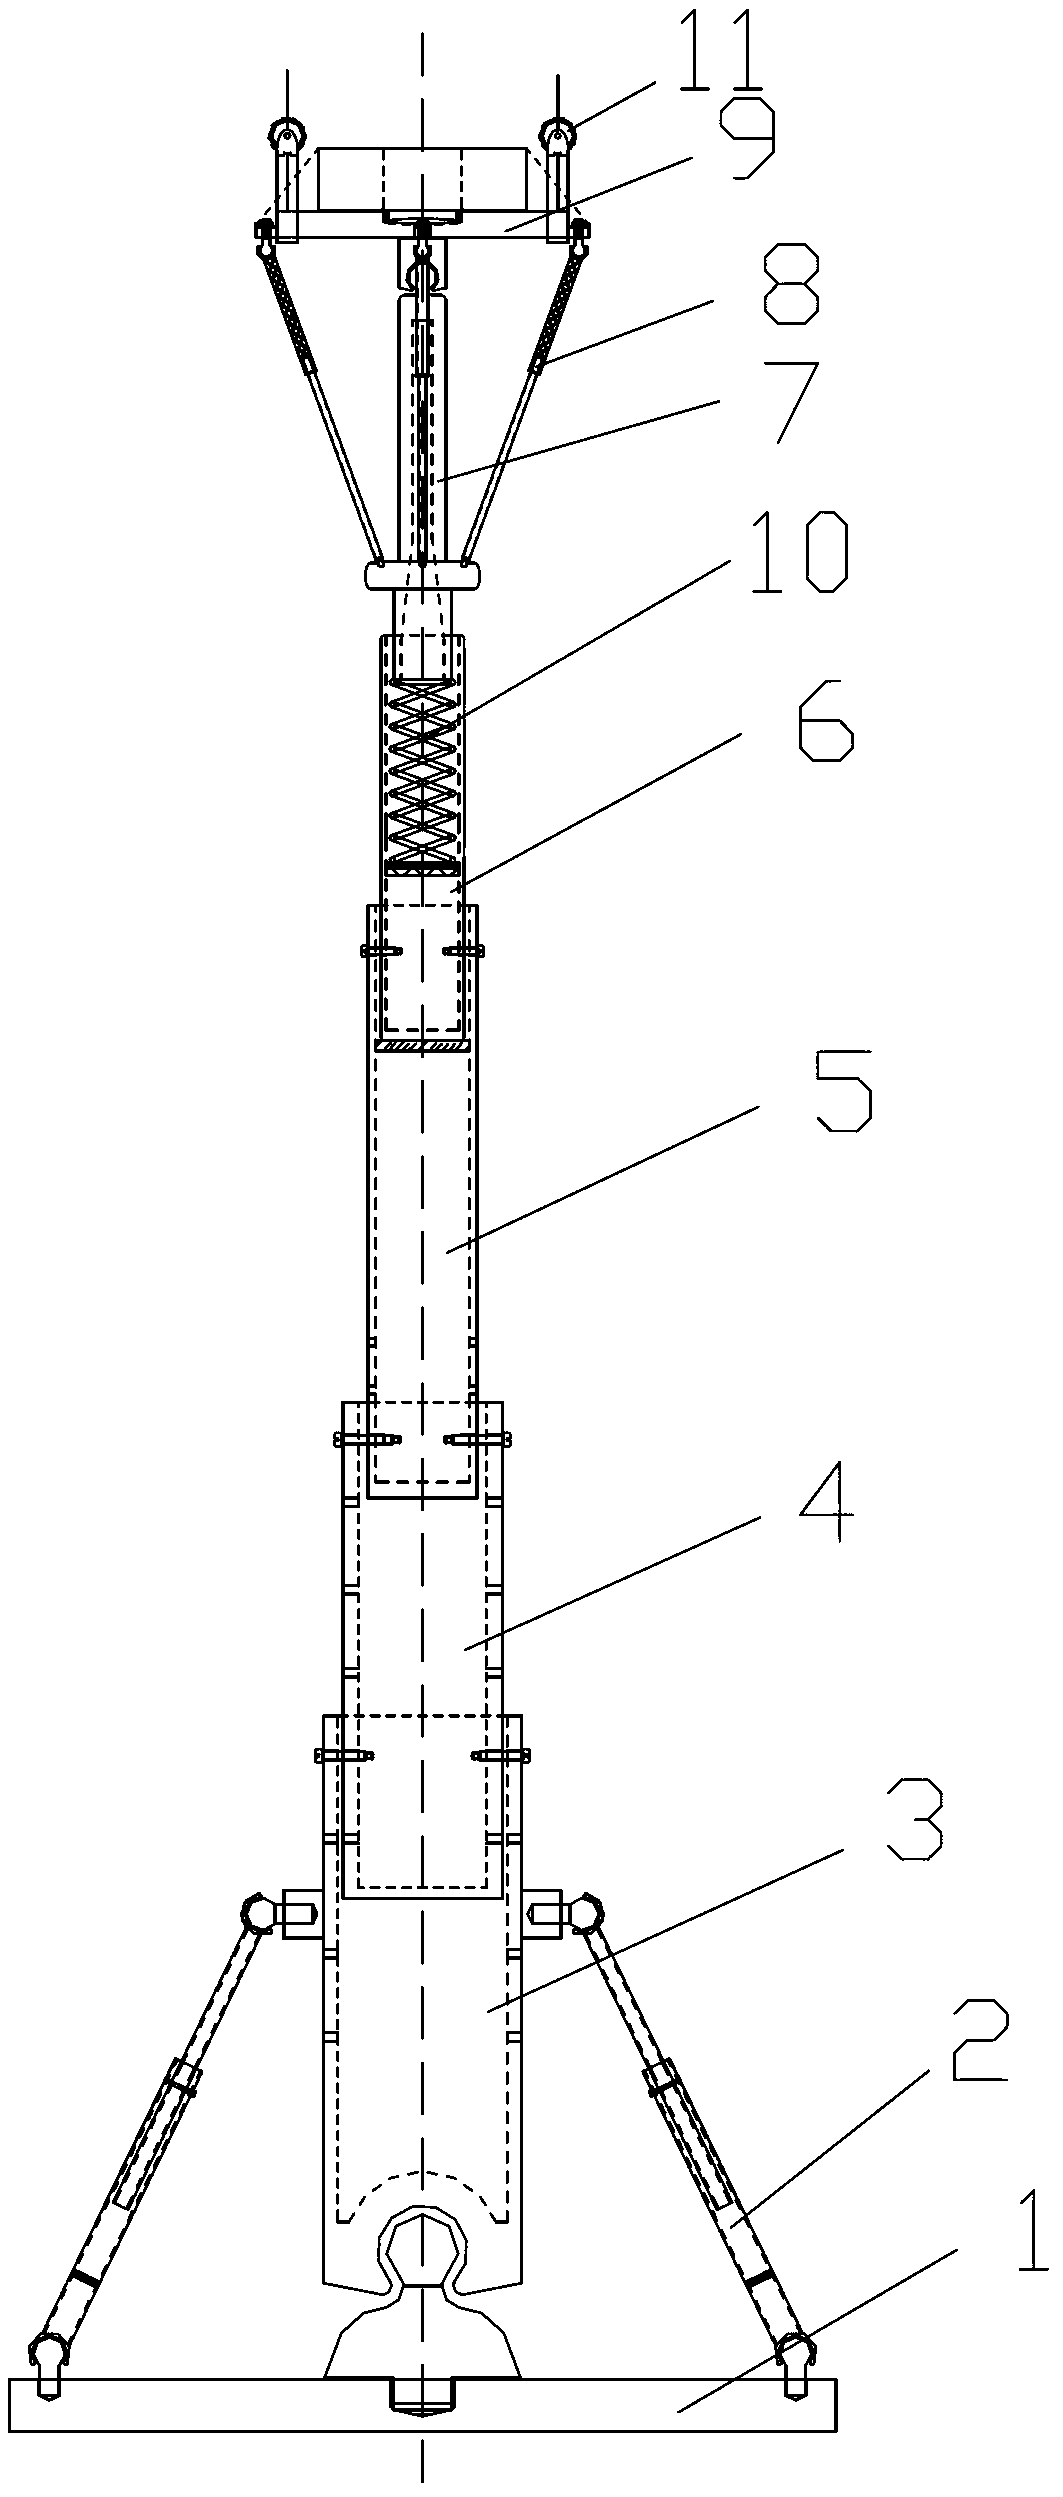 Tunnel lining detection support with height and angle capable of being automatically adjusted